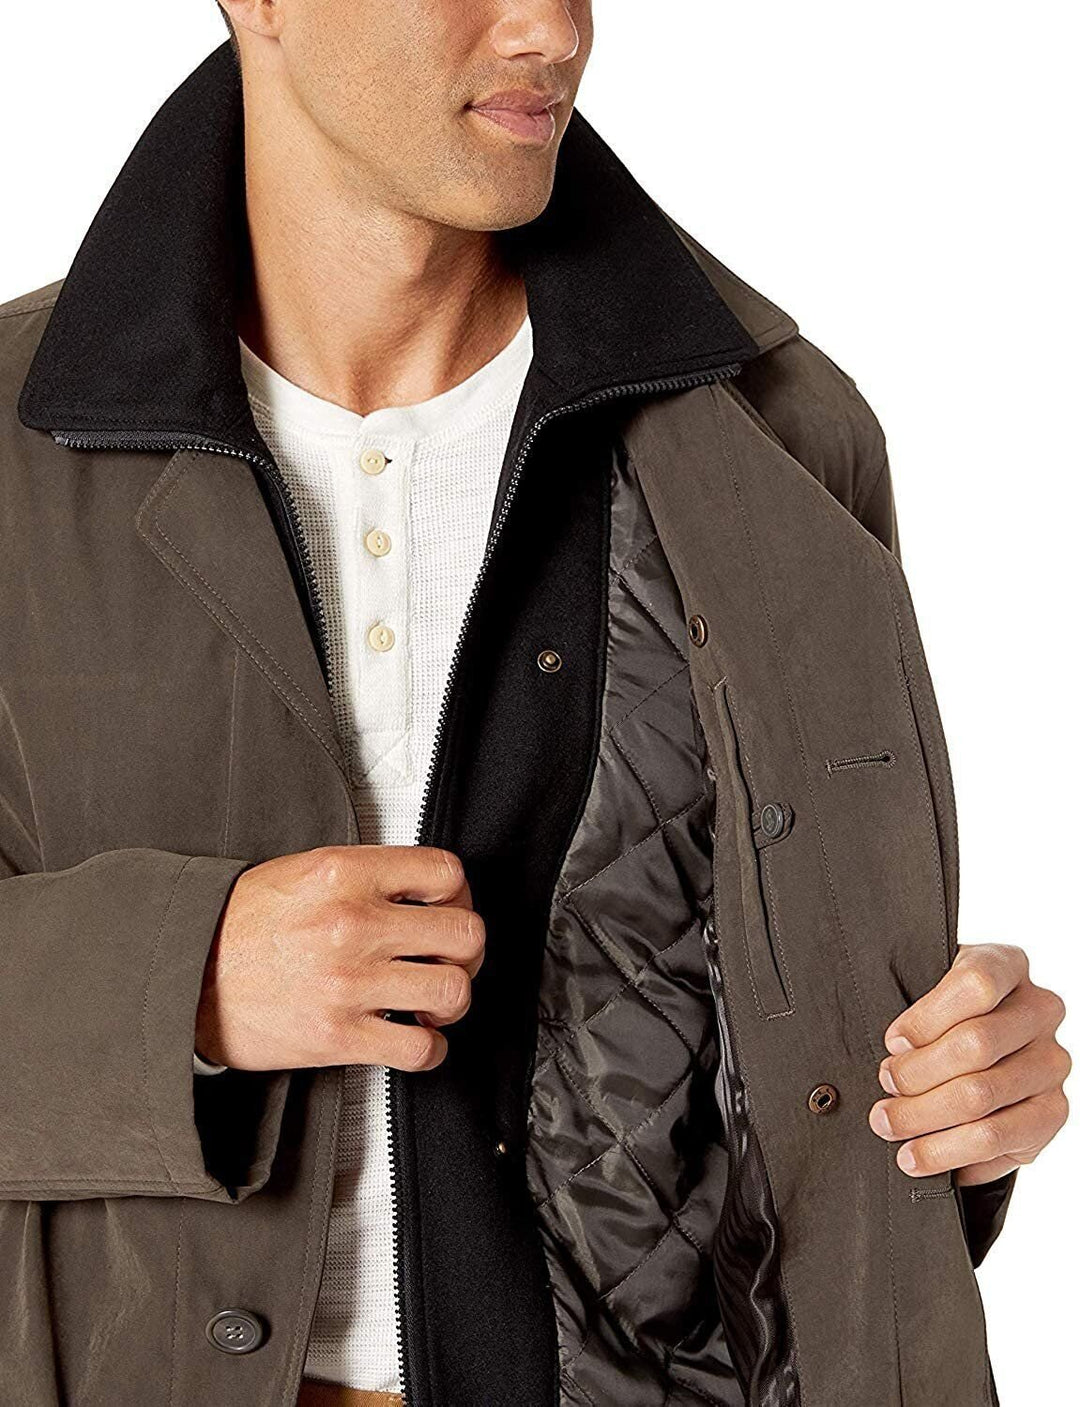 Adam Baker Men's Single Breasted Jacket 3/4 Length All Year Round Raincoat with Removable Liner